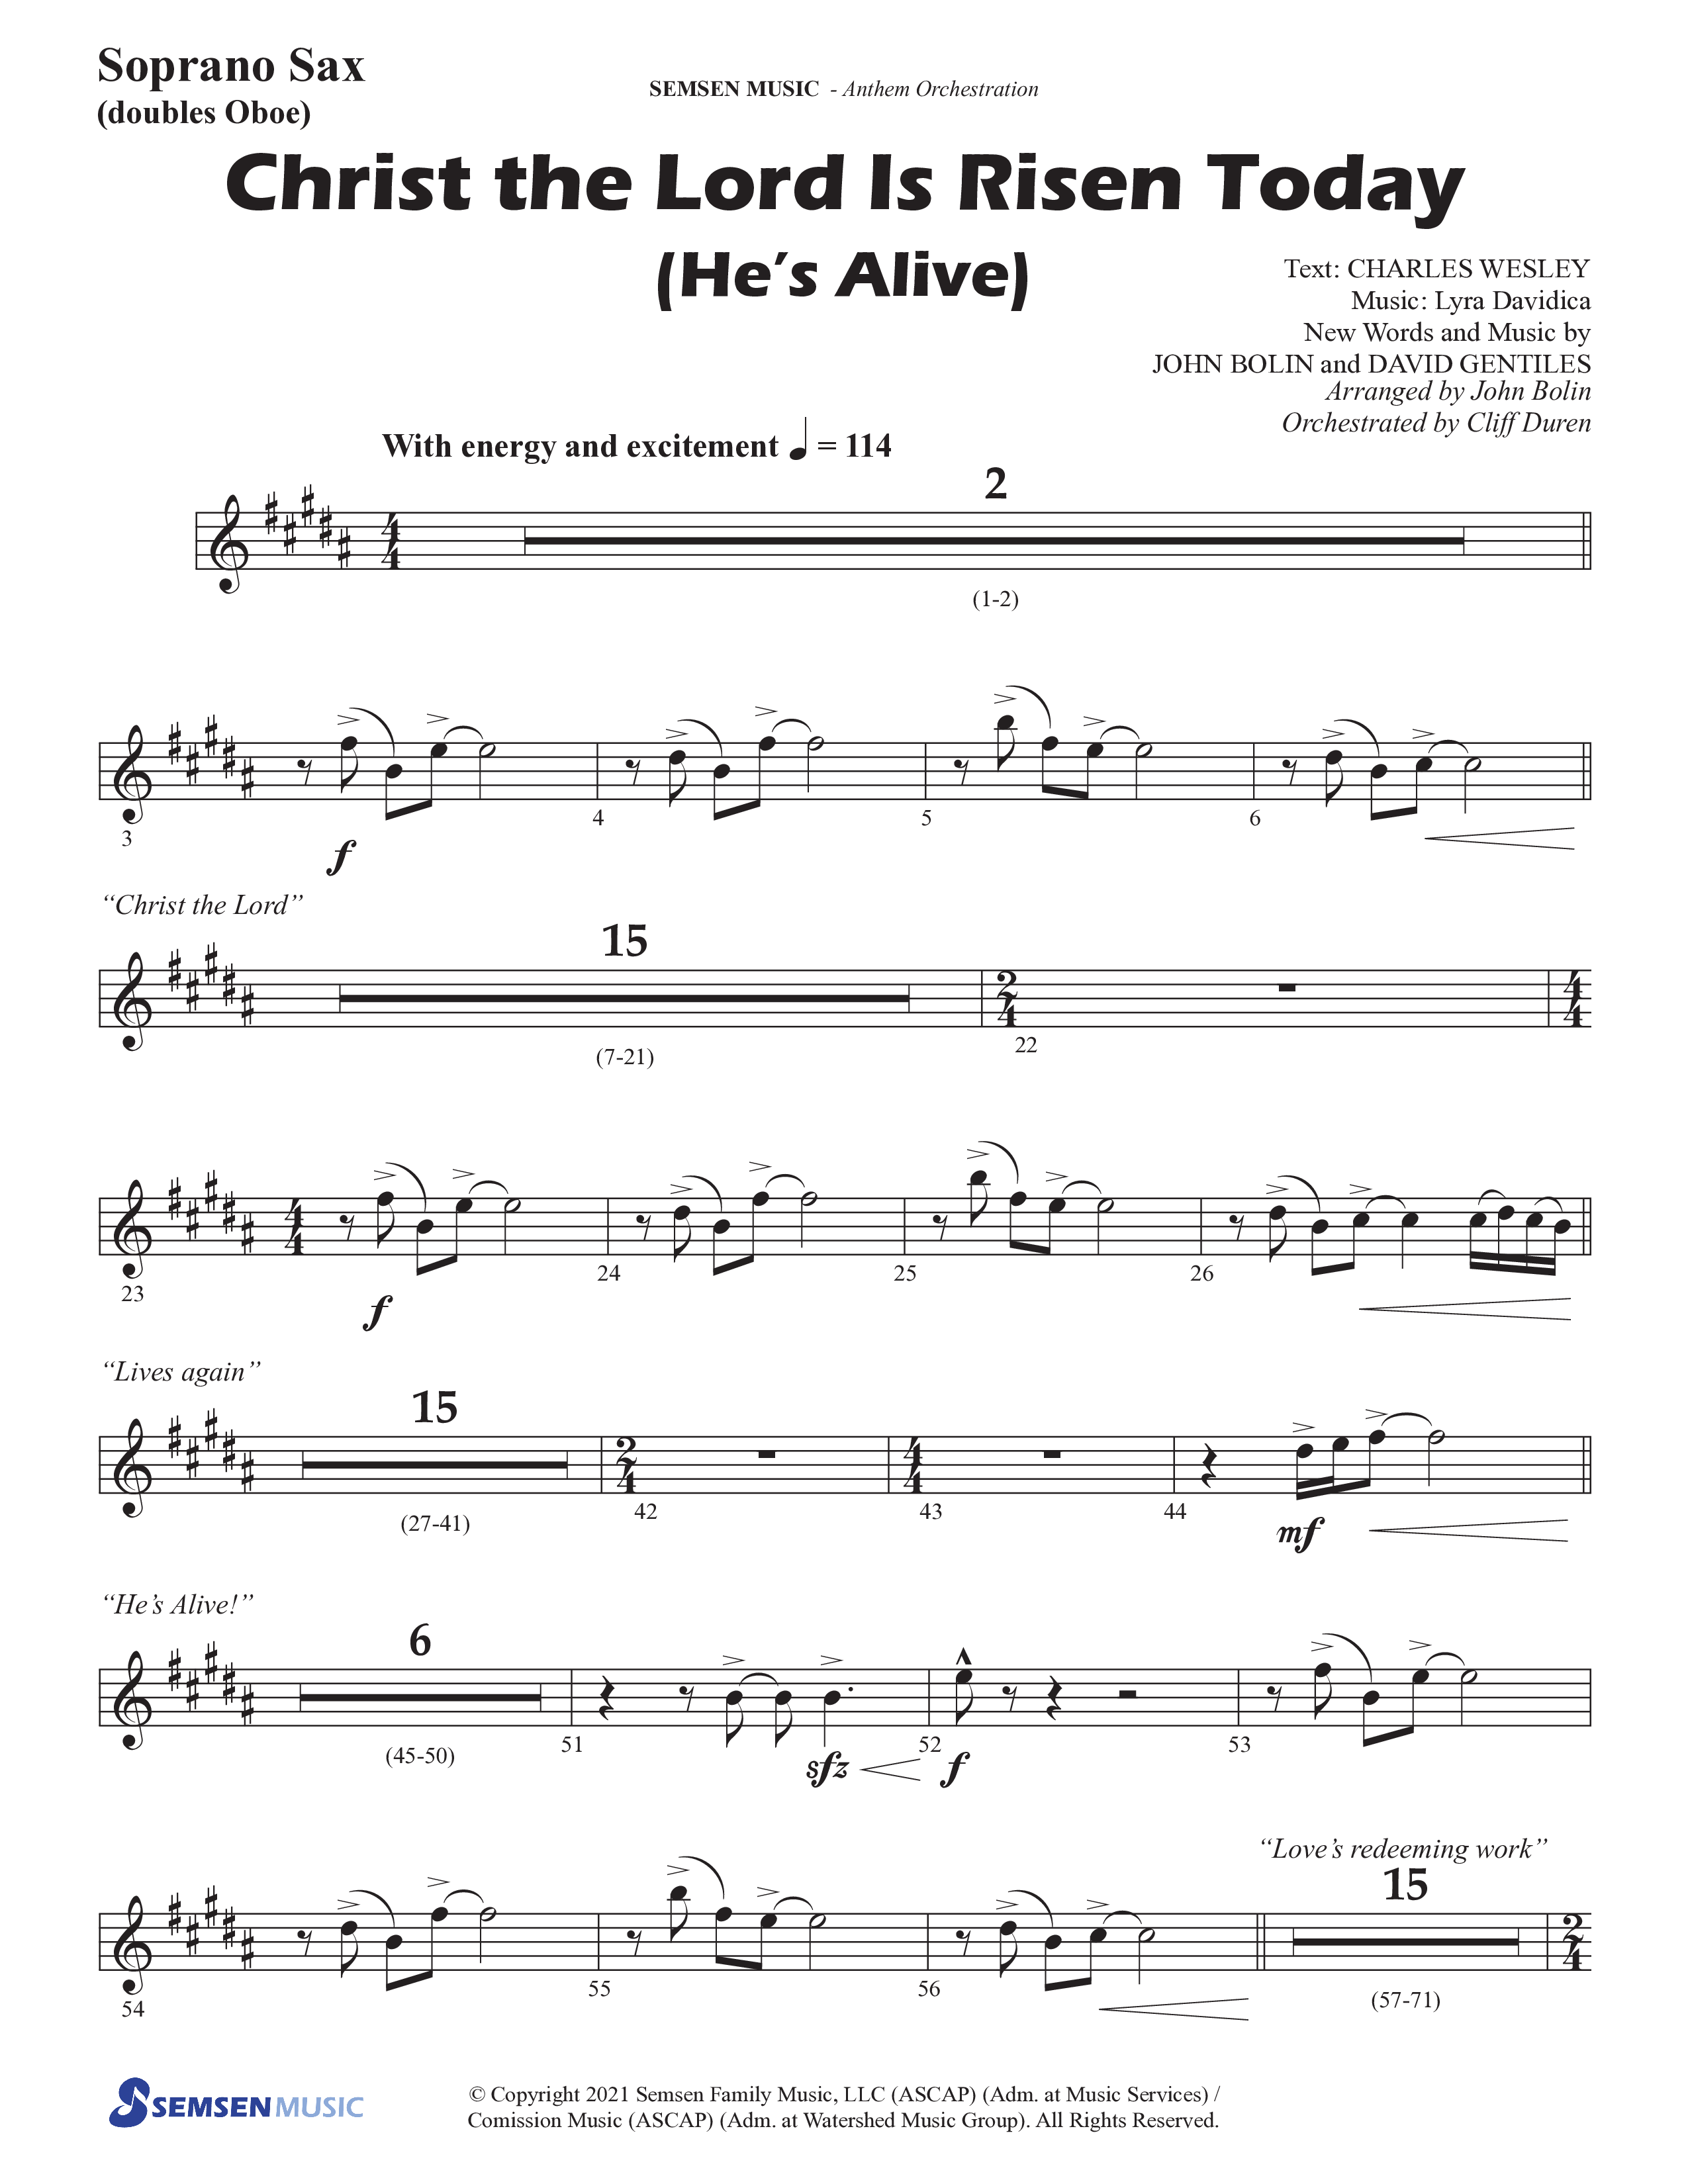 Christ The Lord Is Risen Today (He's Alive) (Choral Anthem SATB) Soprano Sax (Semsen Music / Arr. John Bolin / Orch. Cliff Duren)